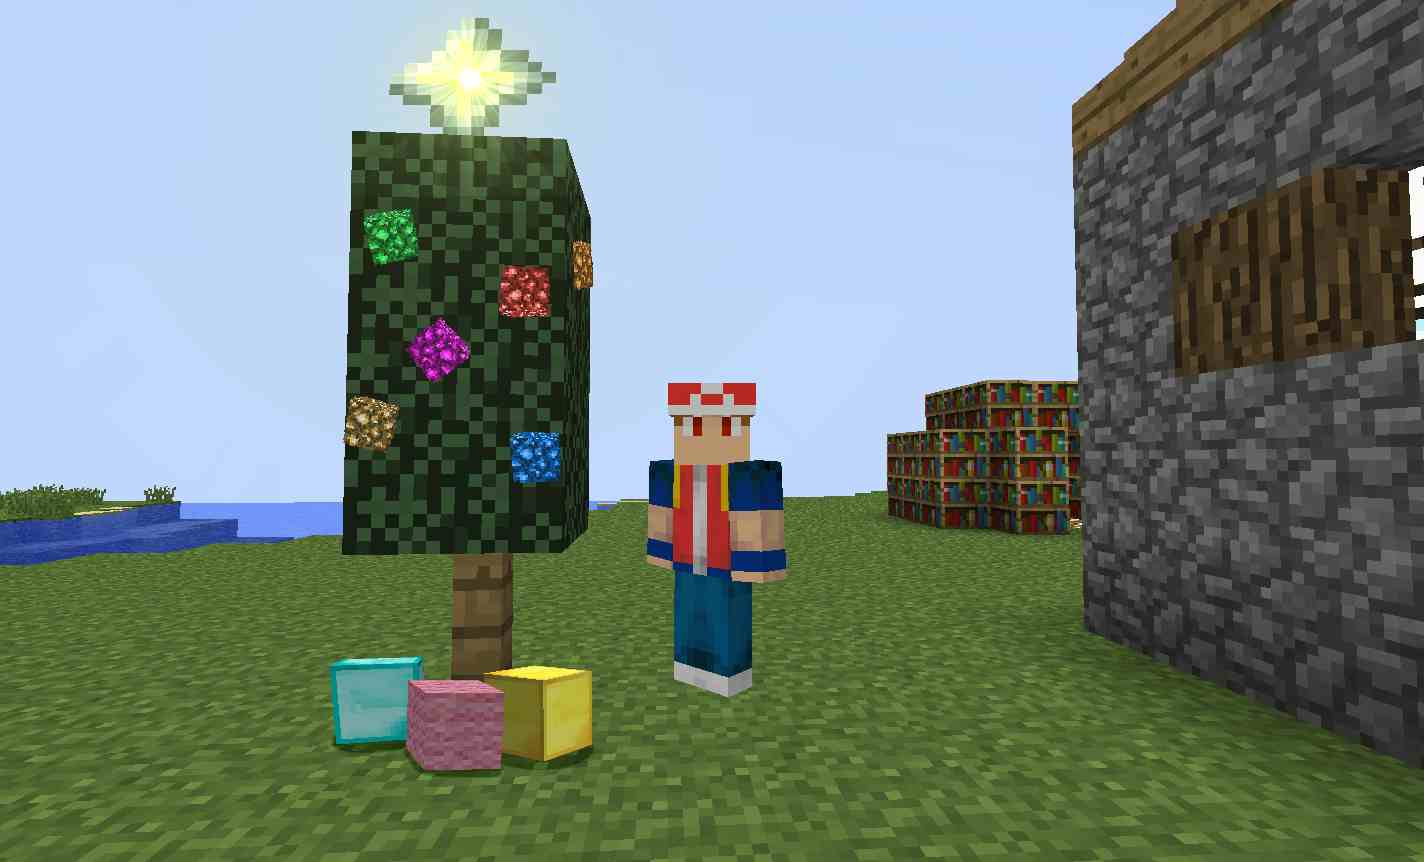 minecraft skin pack education edition